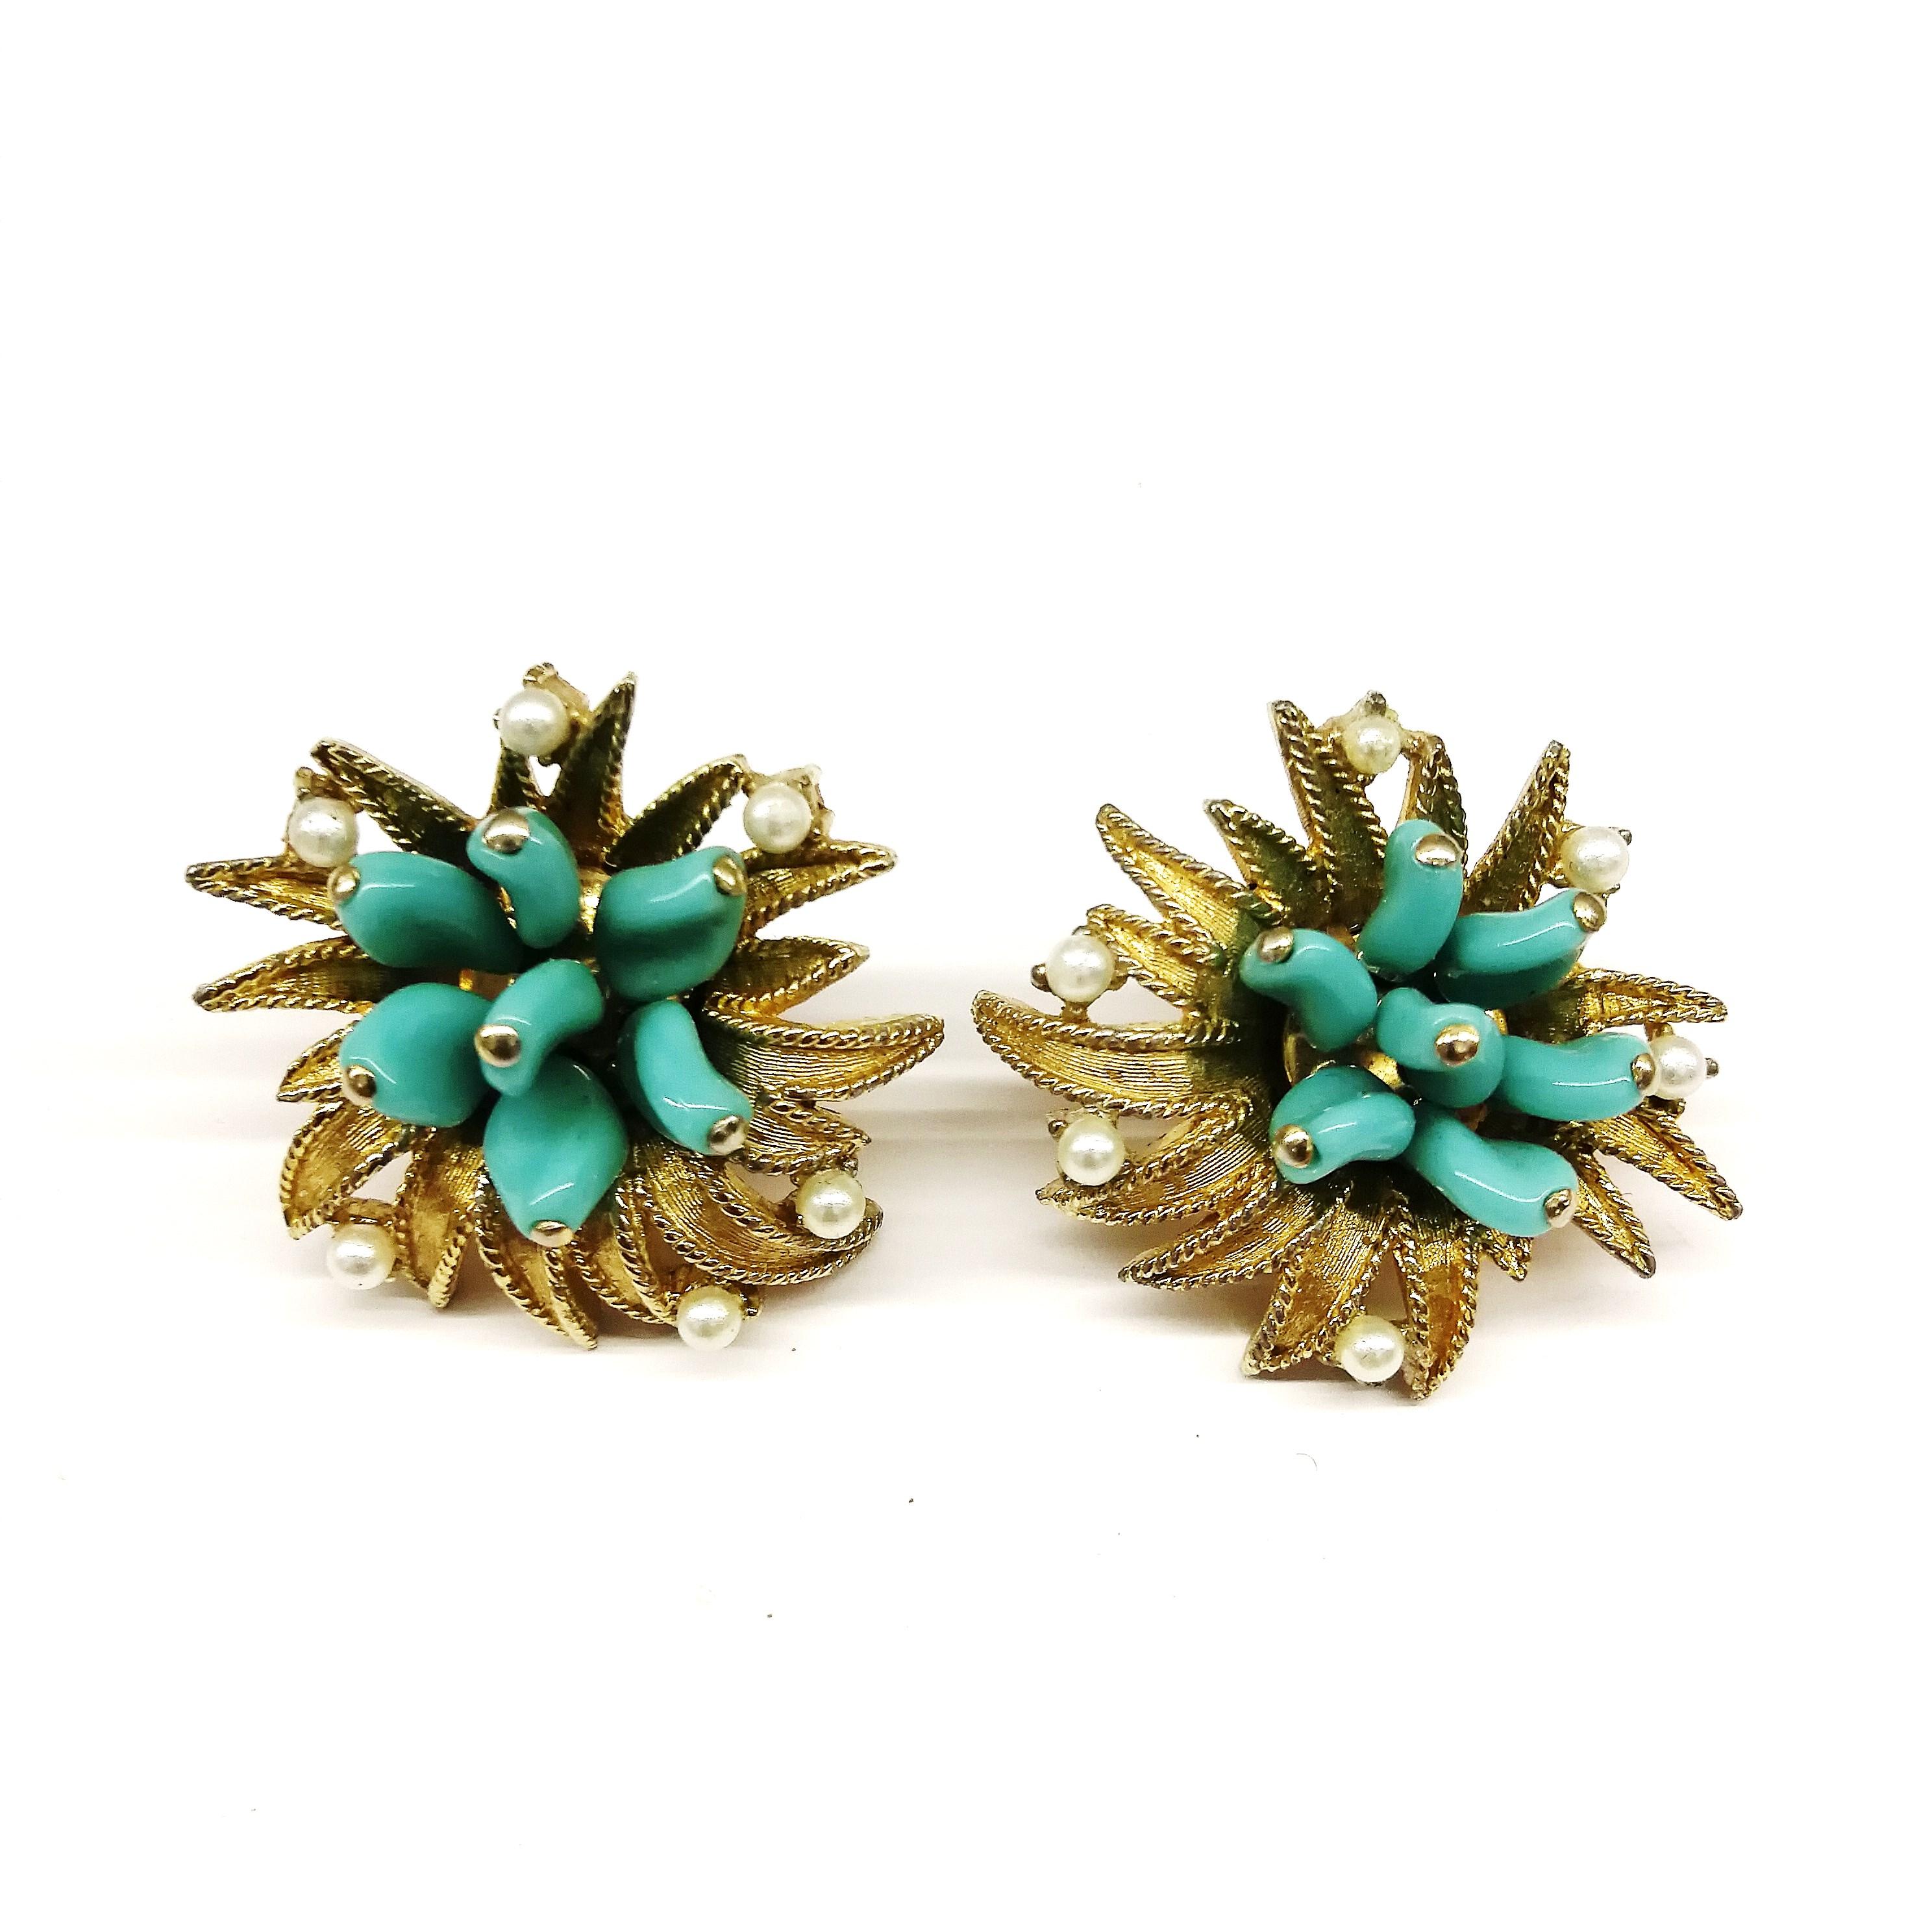 Bright 'sunburst' style earrings with turquoise glass 'petals' and paste pearls, from Marcel Boucher, displaying the high quality always found with this designer. Not highly dressy, but bright and glamorous, making these earrings very